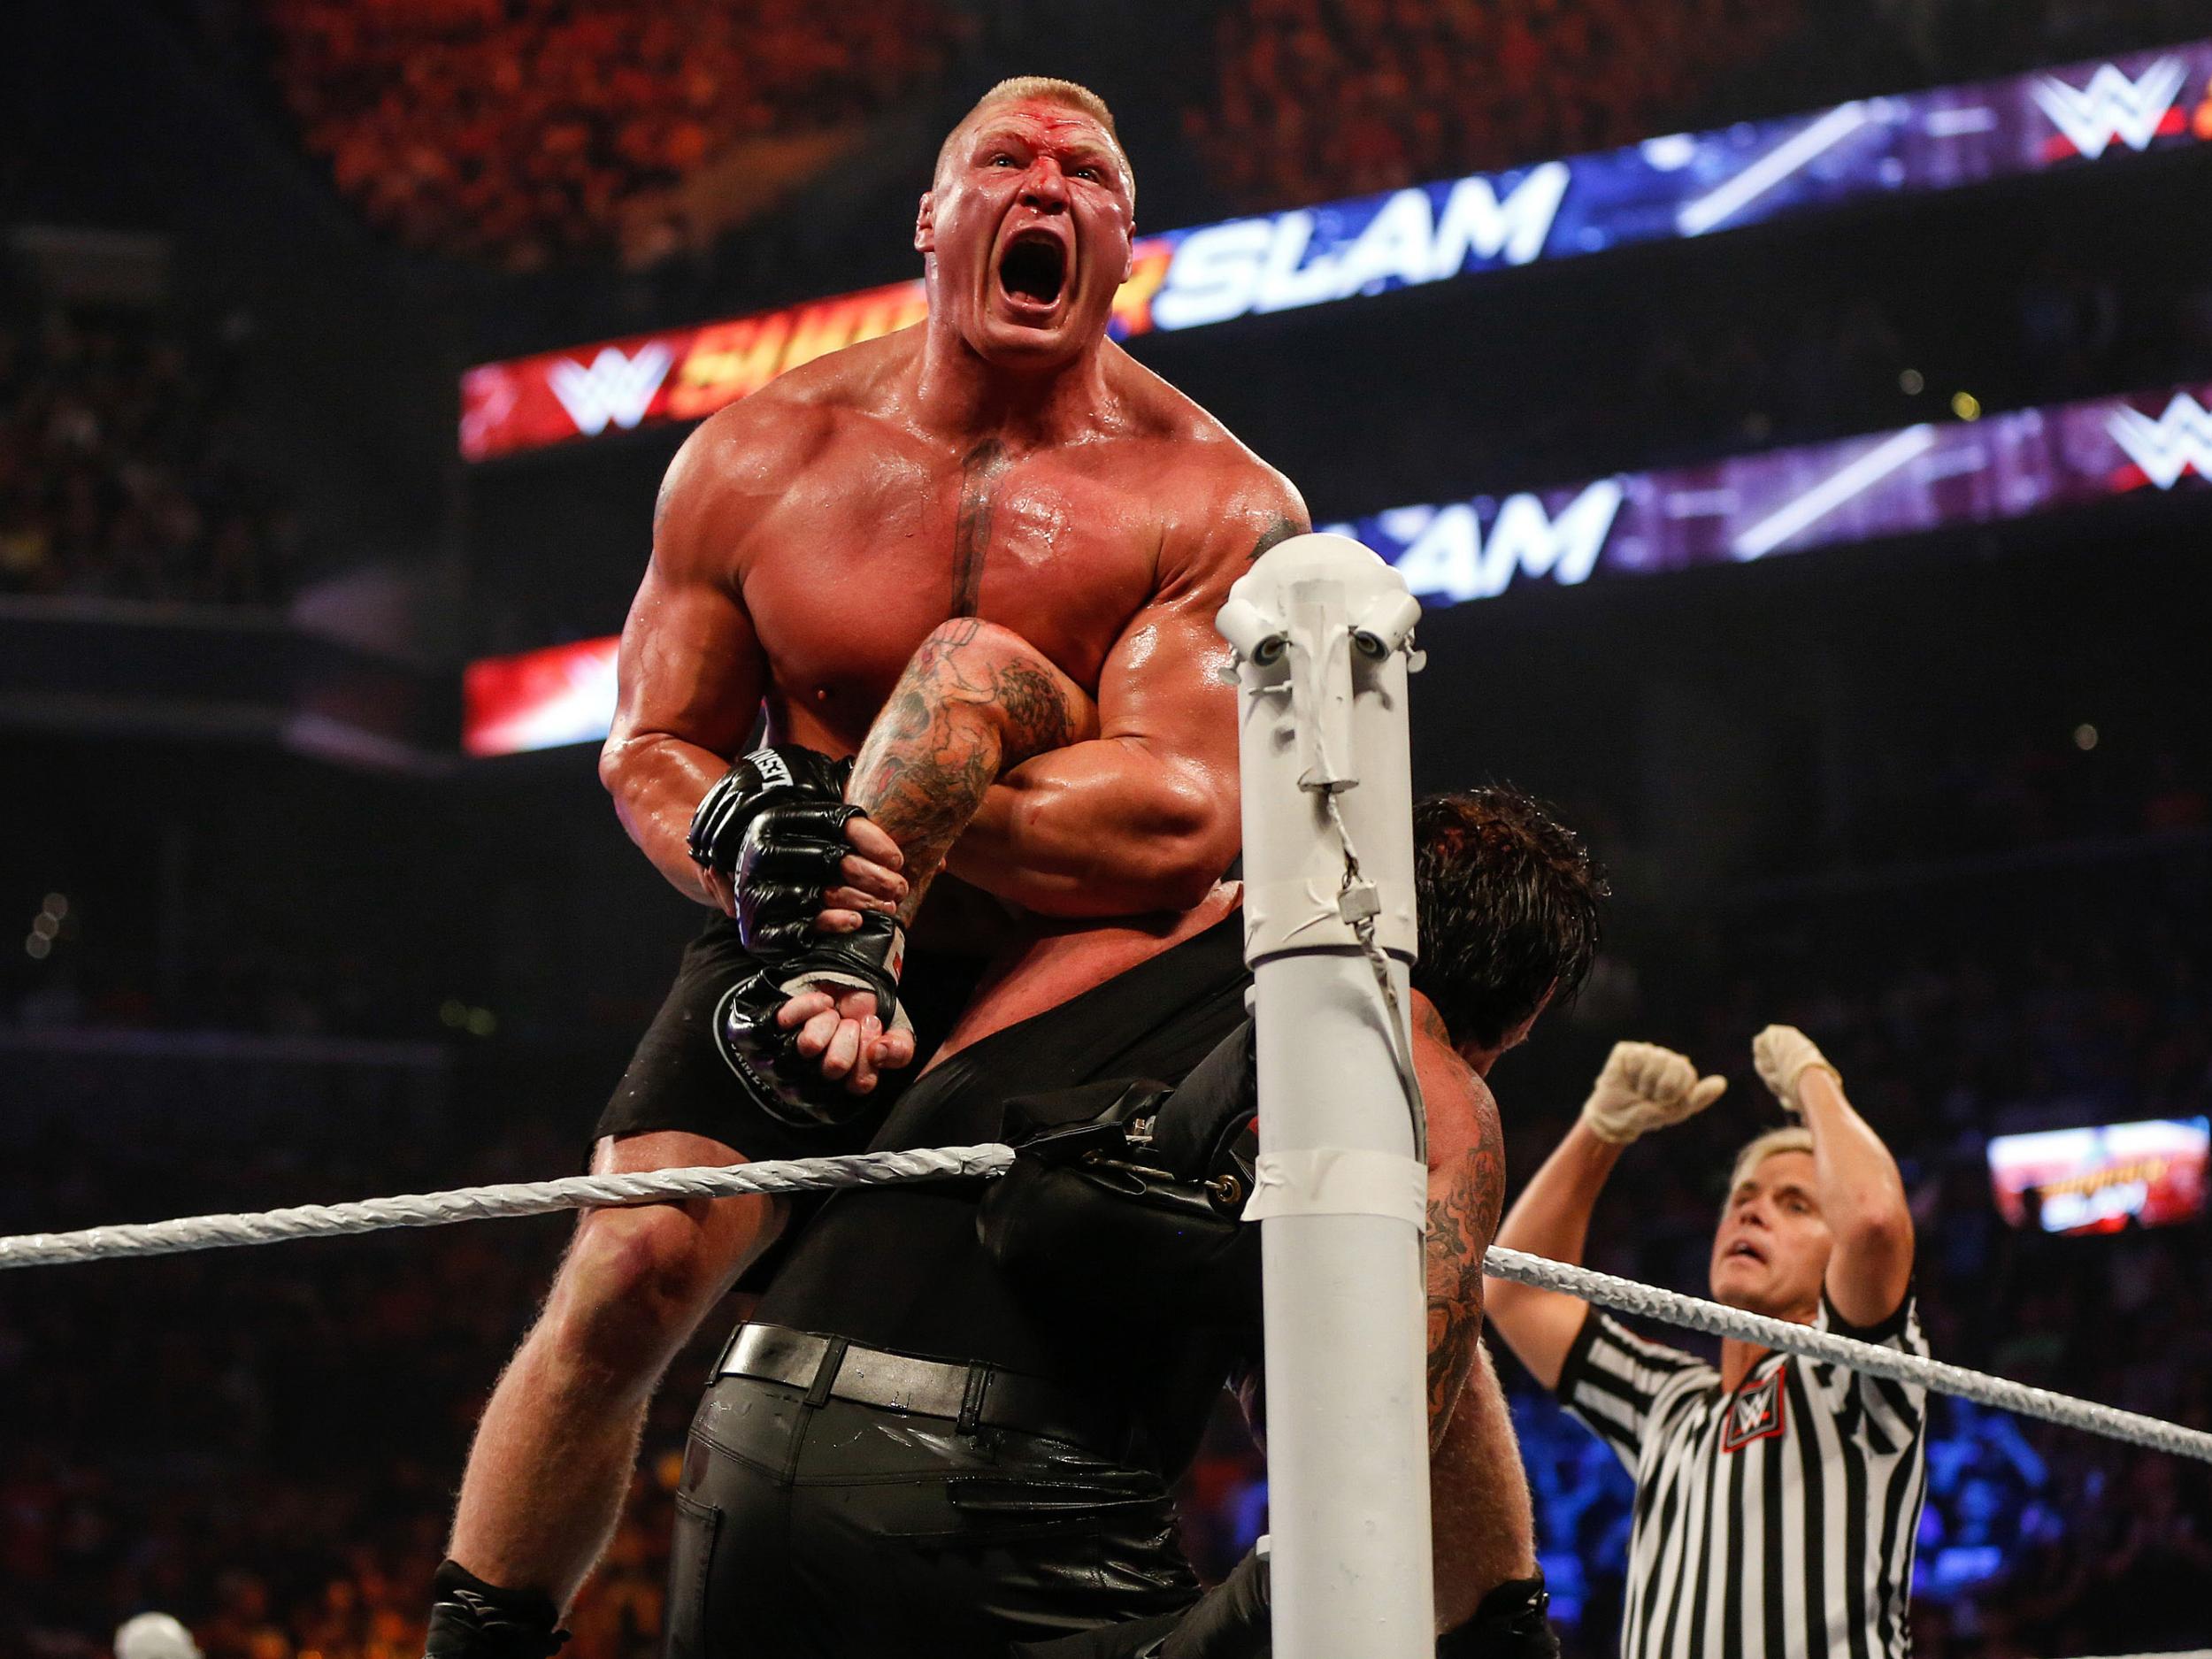 Brock Lesnar will compete in the Universal Championship